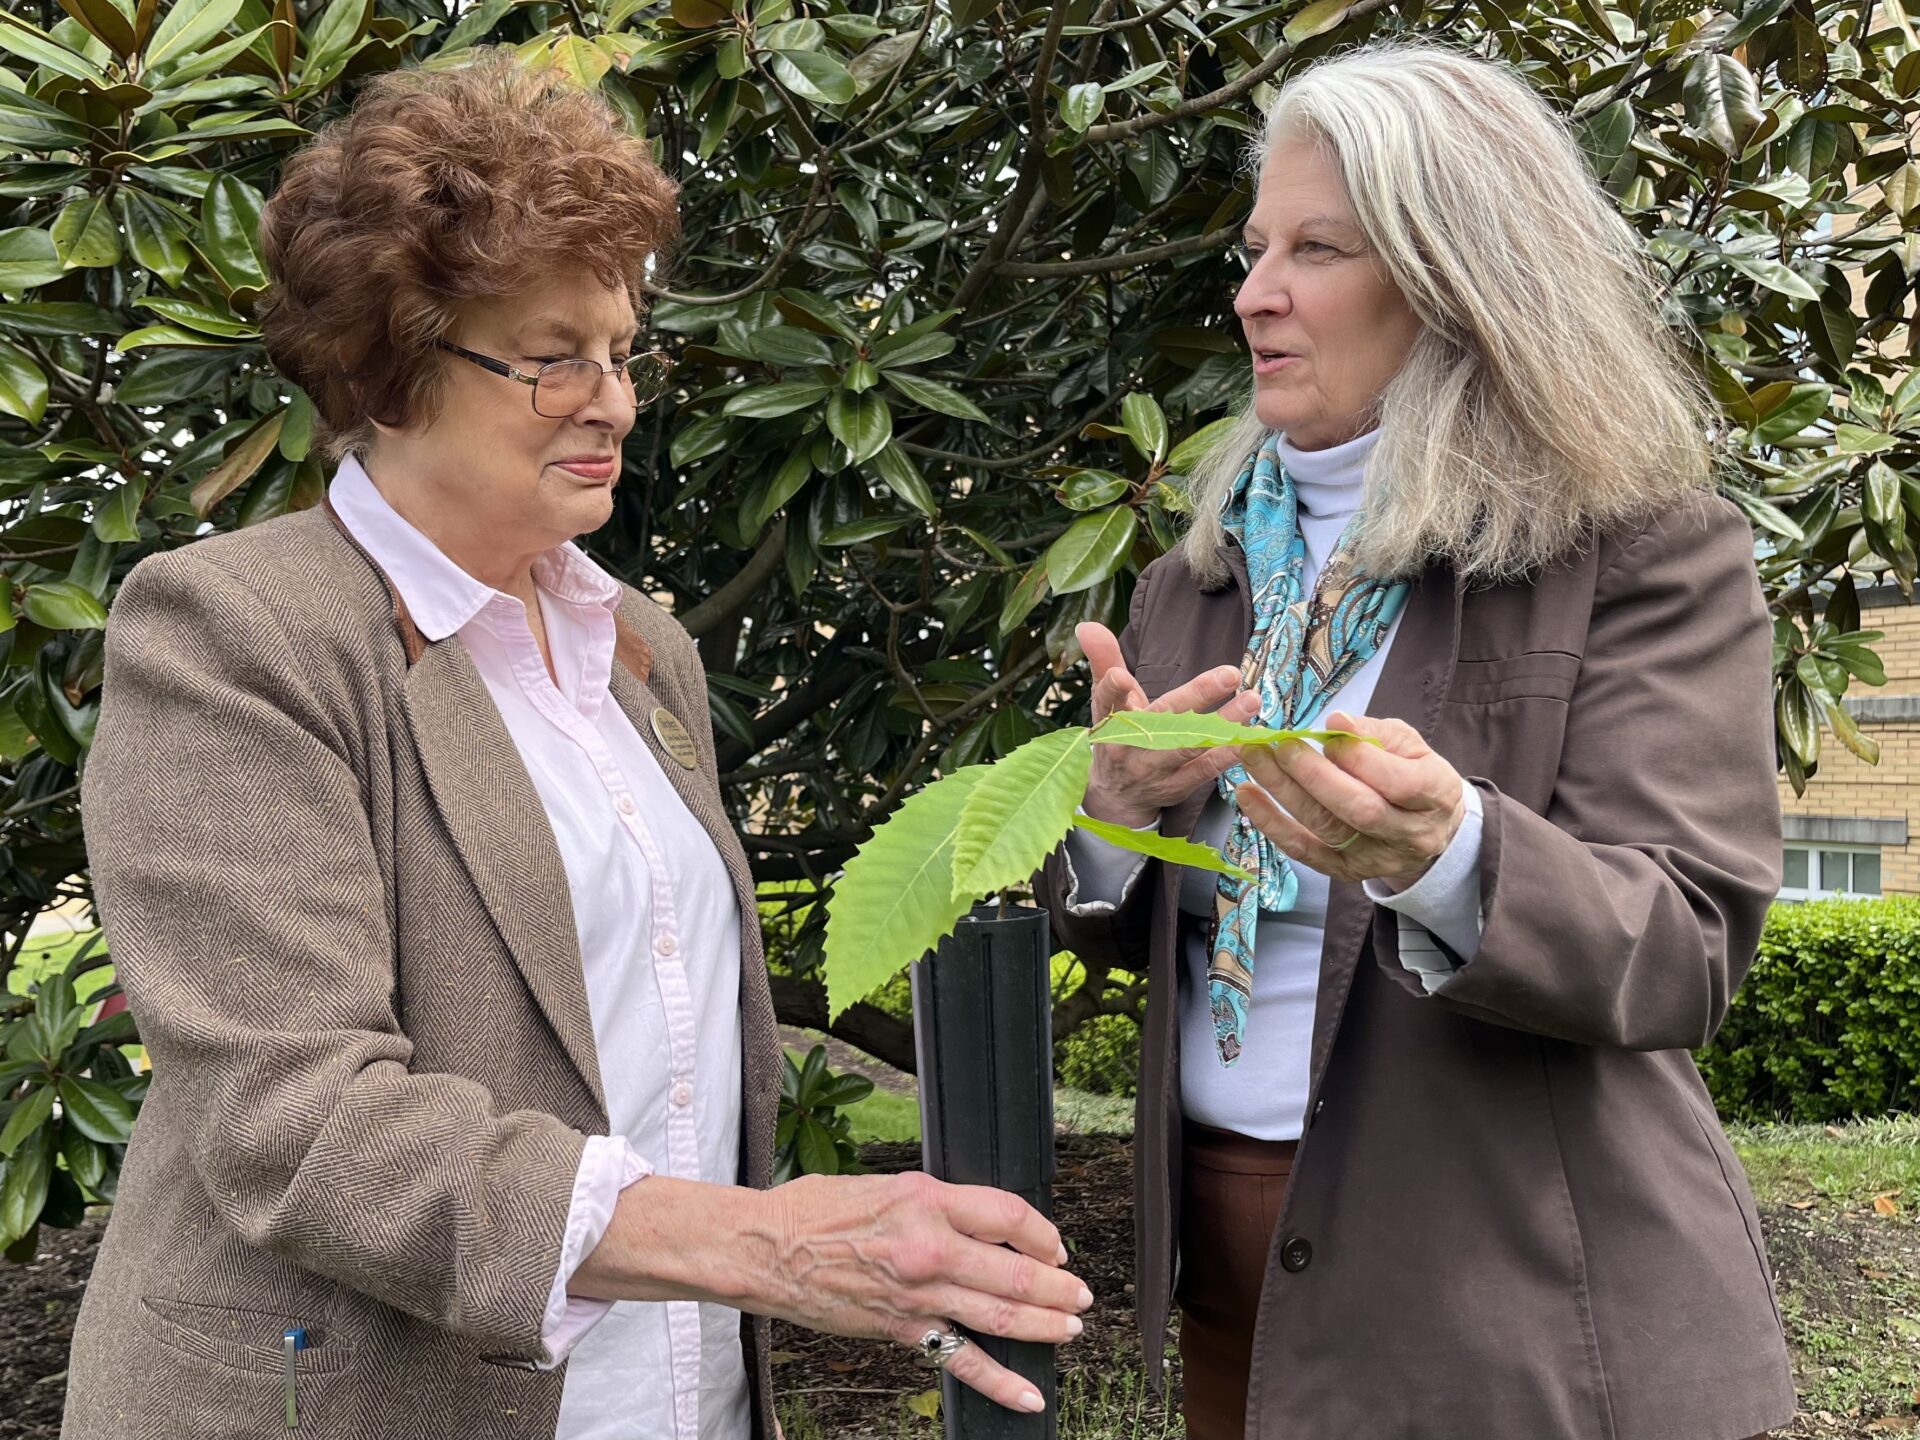 Two women stand together, examining the leaves of a tree sapling in a black, plastic tube, The women on the left is holding the sapling in its tube, while the woman on the right is pointing at its leaves and speaking.